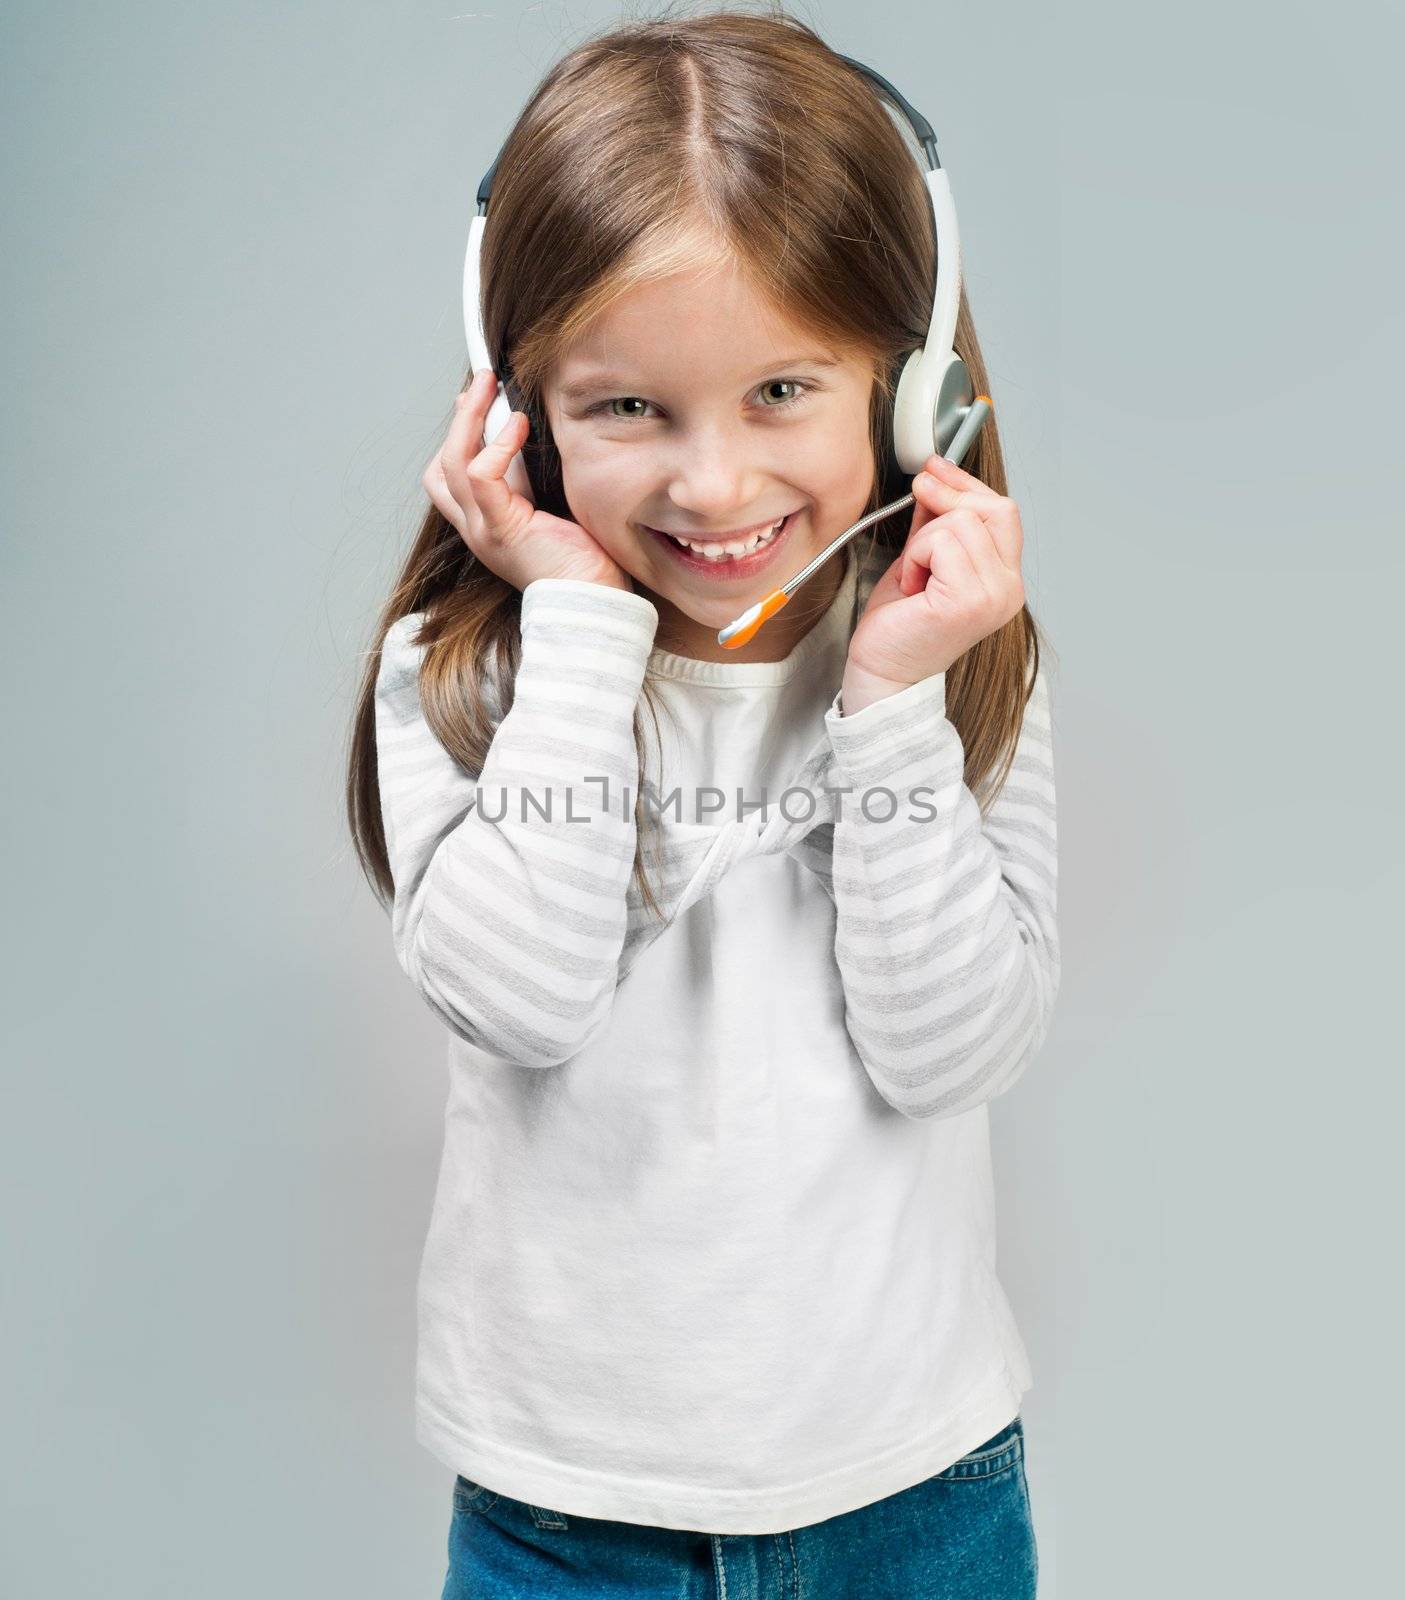 Smiling little girl in headset looks into camera